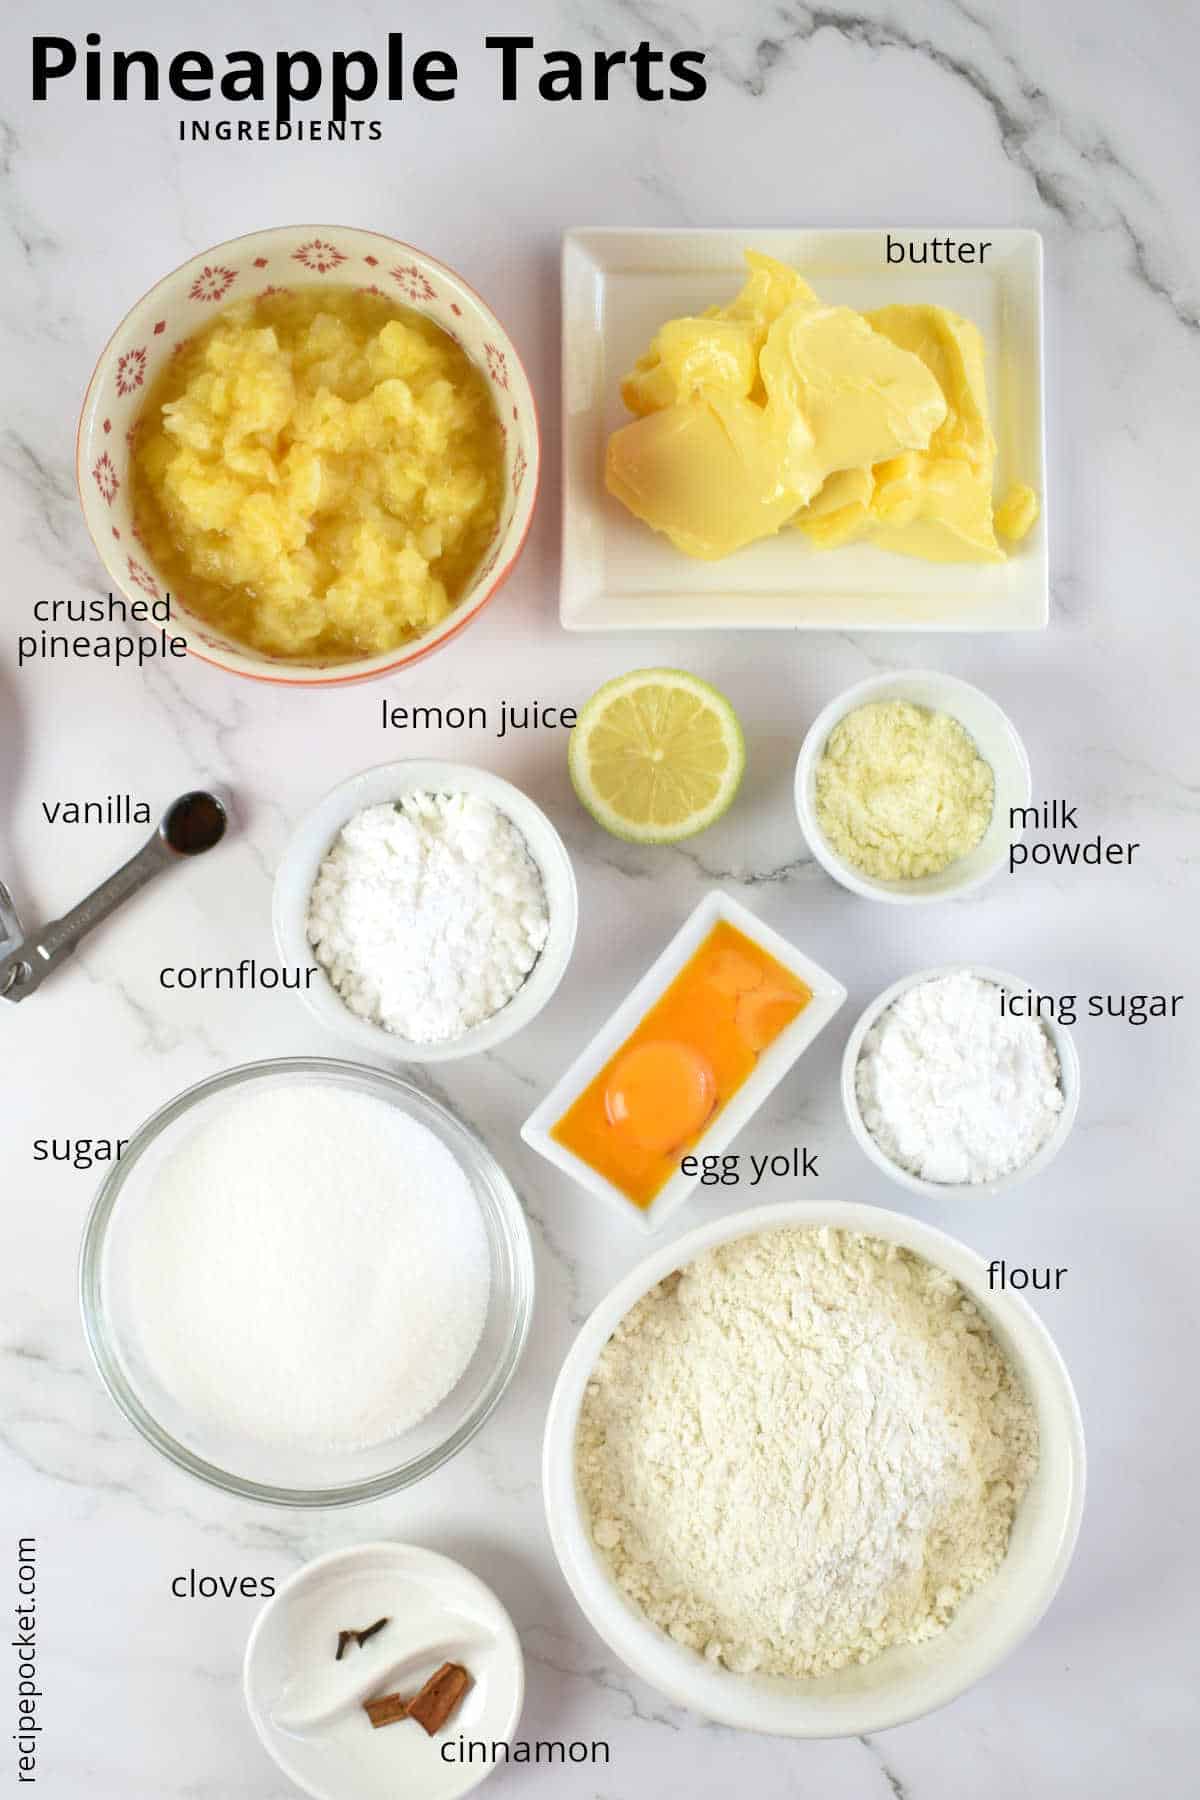 Image showing the ingredients for making pineapple tarts.